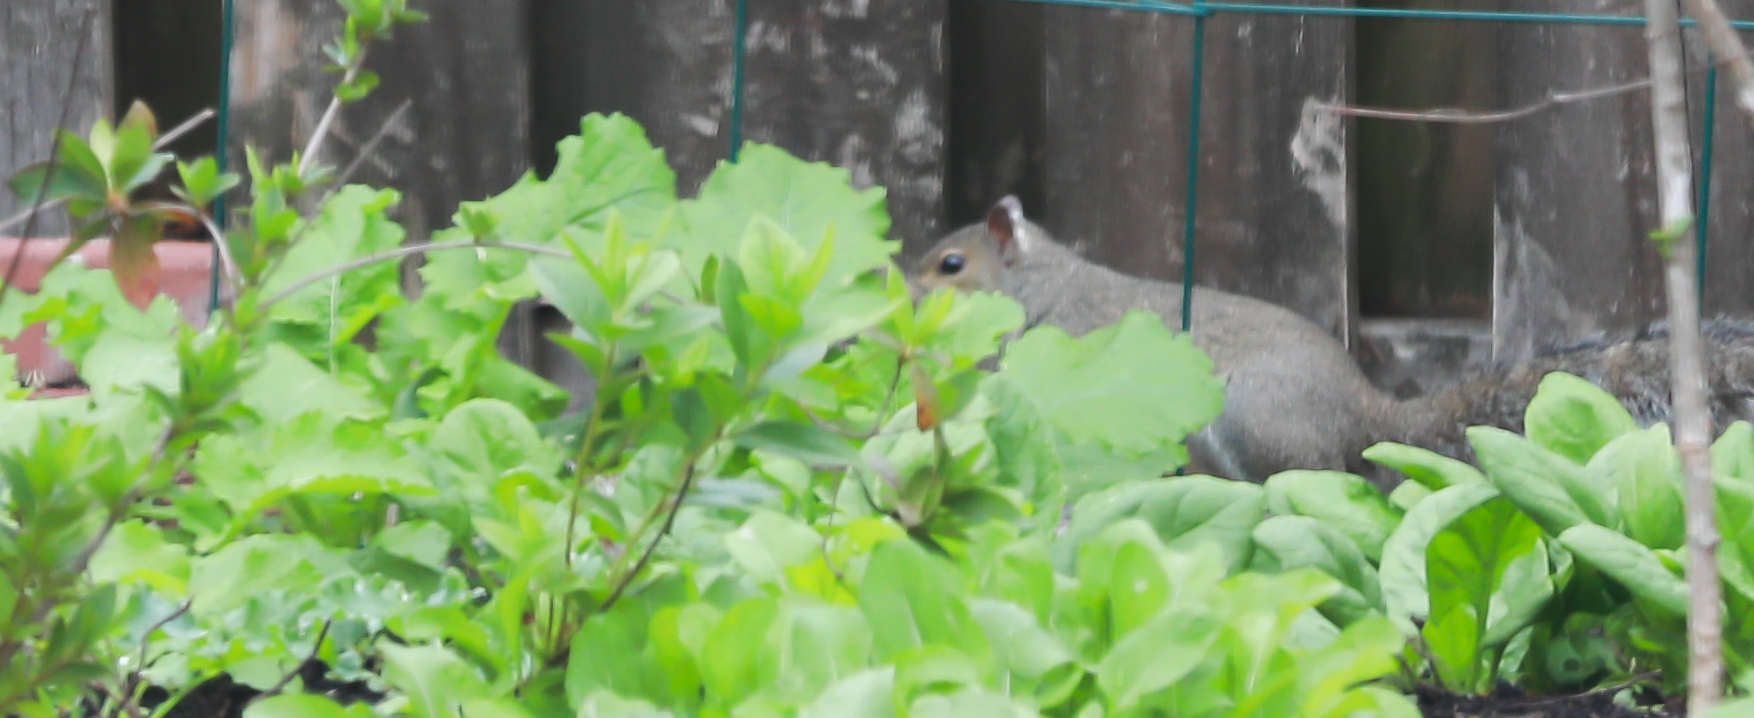 Around the Garden-2.jpg - Caught a squirrel red handed among the radishes! by Cat Cornish Photography